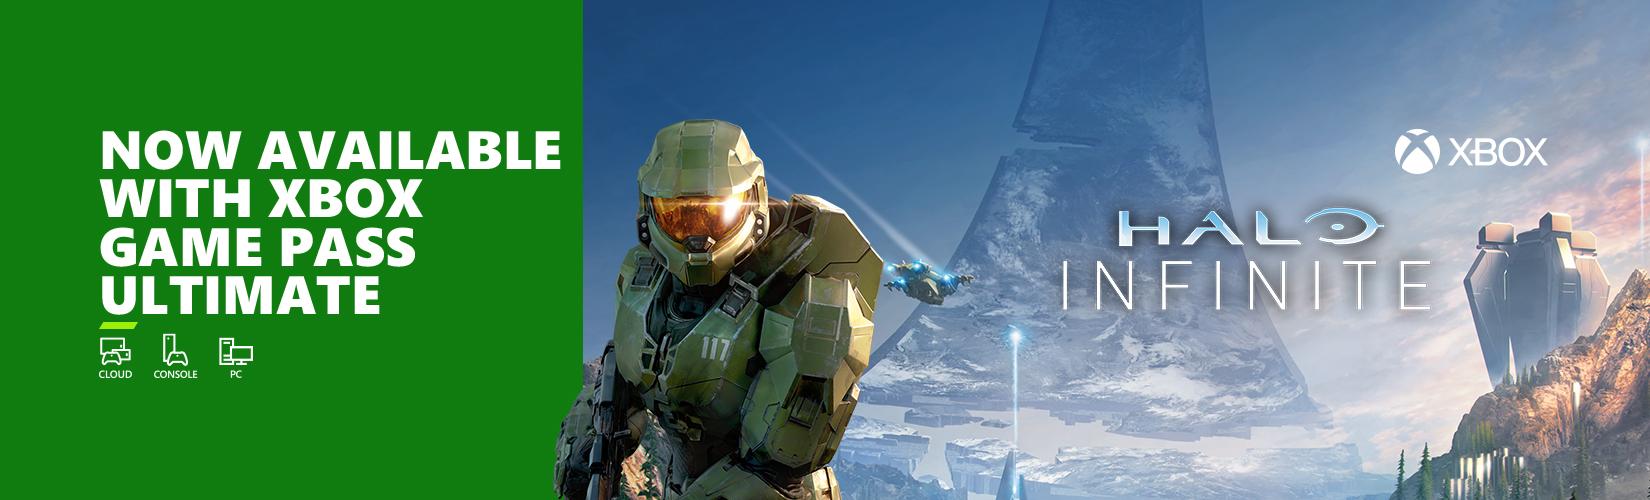 Halo infinite. Now available with Xbox game pass ultimate.